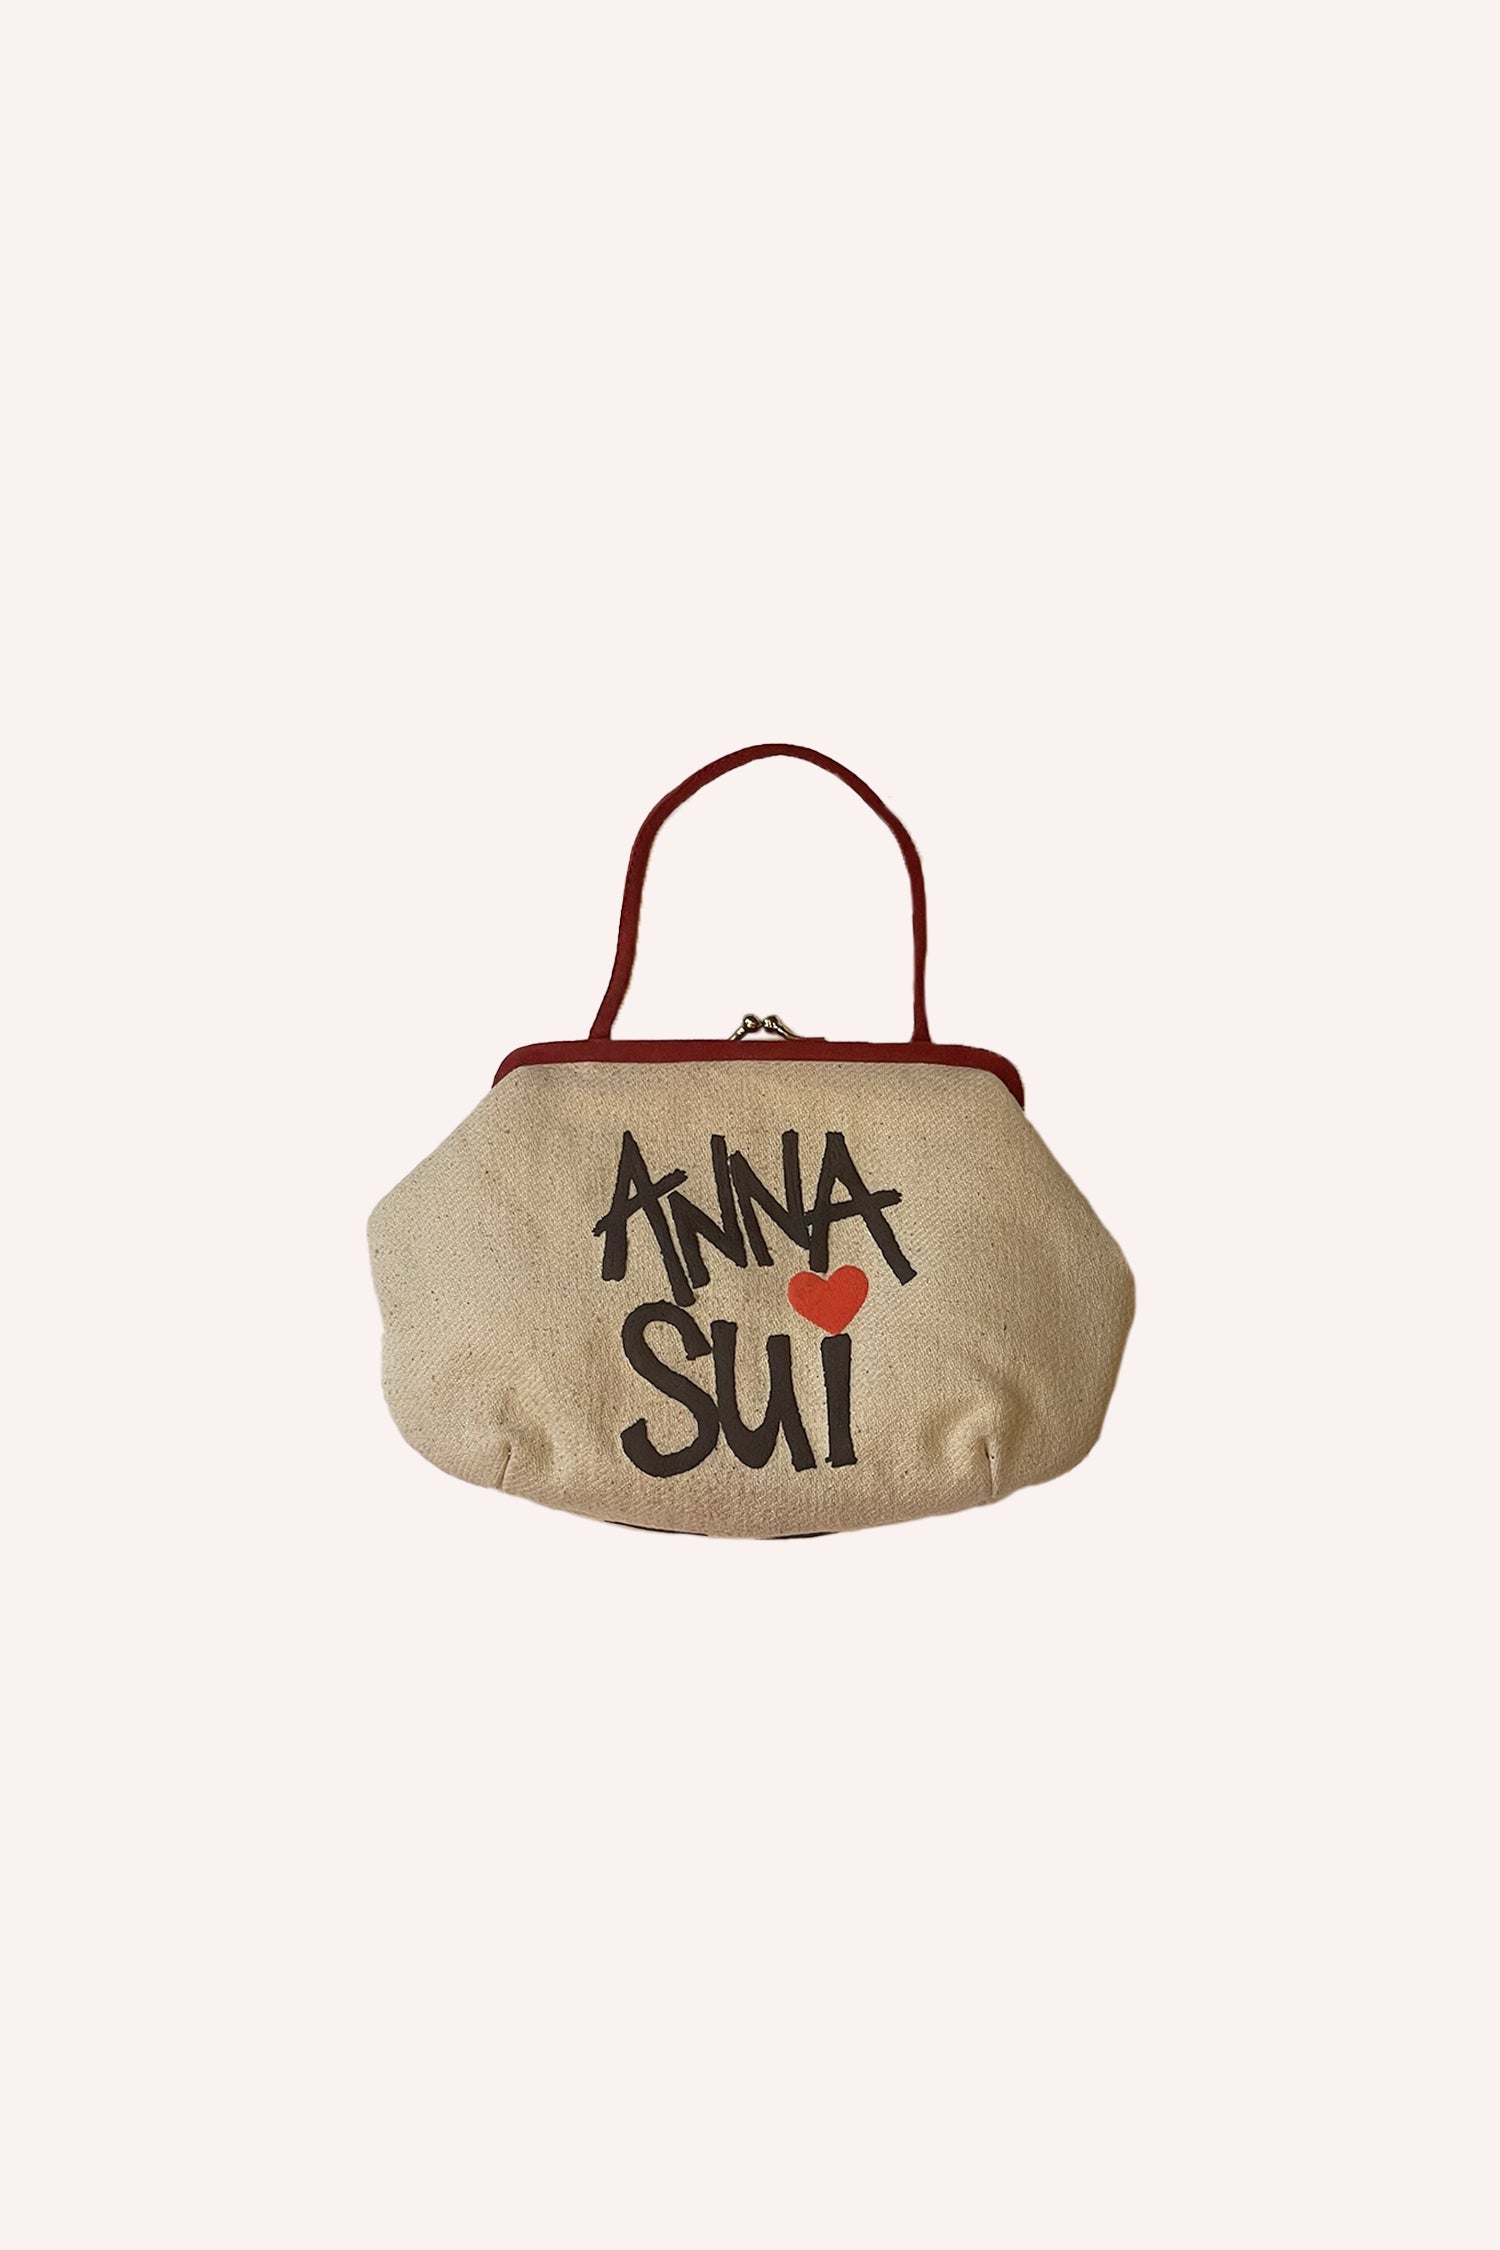 Mini purse light cream, with handle and top hen brown, a locking silver system in top center, Anna Sui branding on the other side